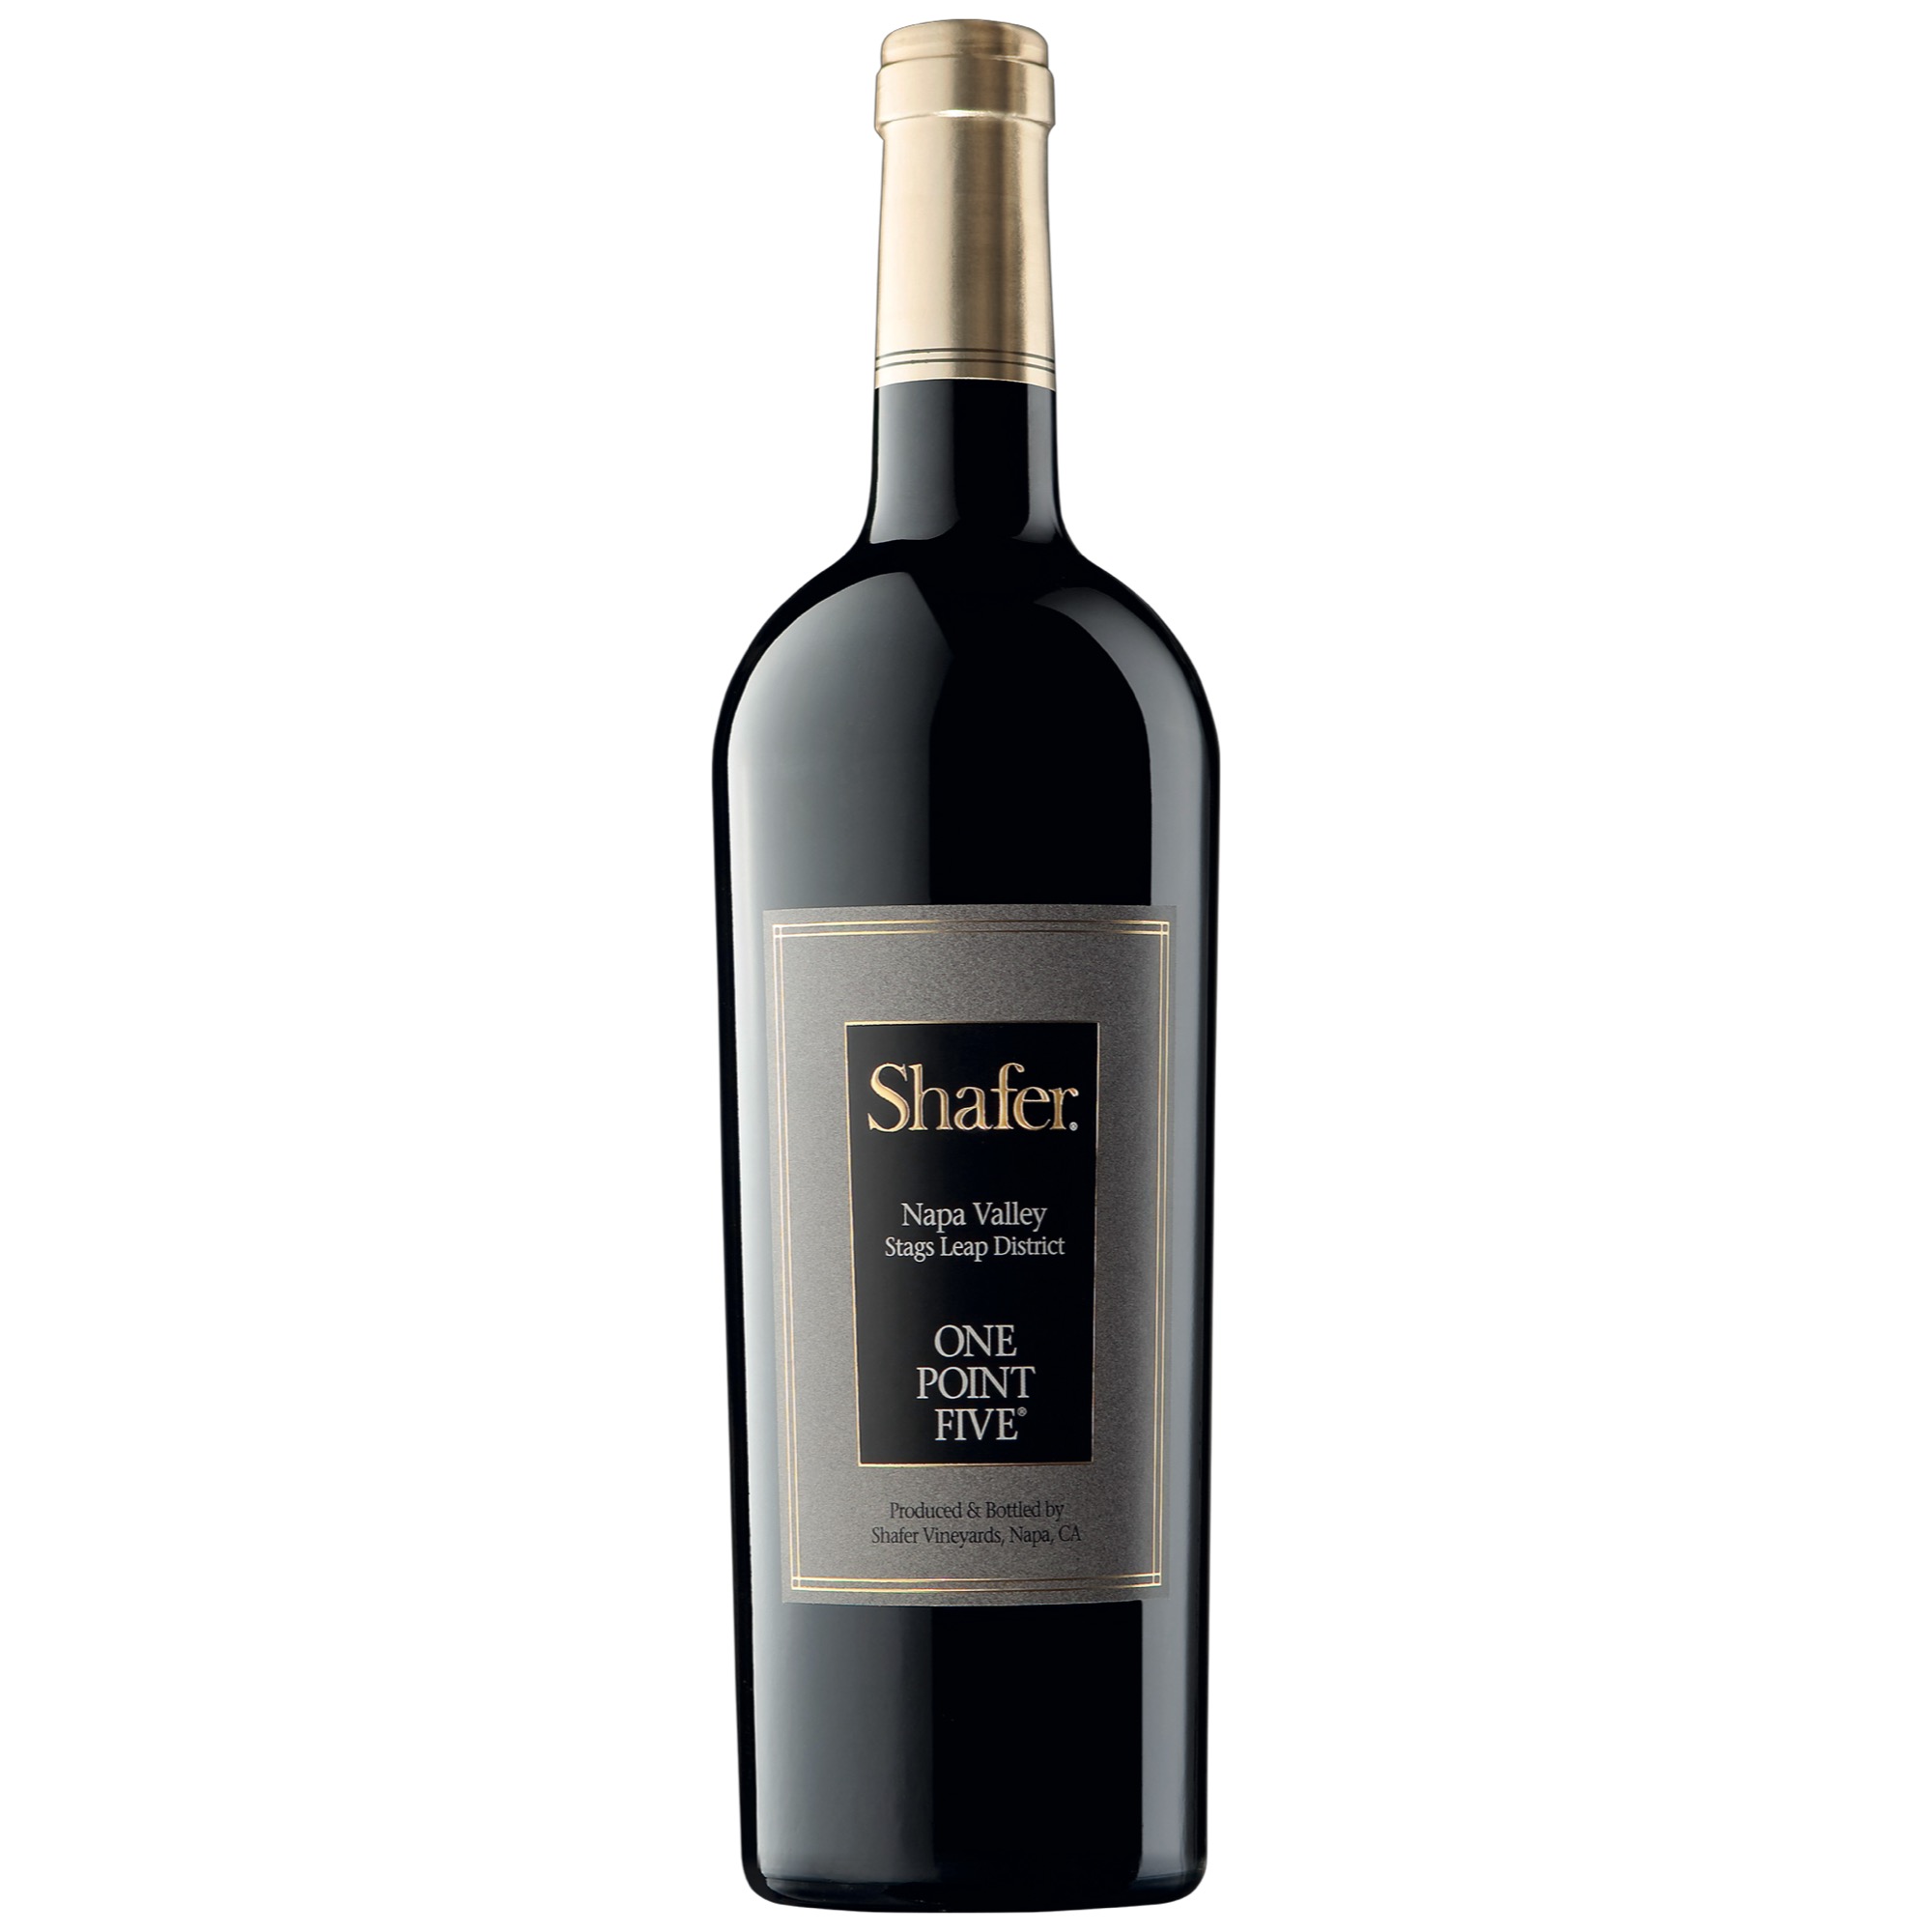 Shafer One Point Five 0,75l, 2009